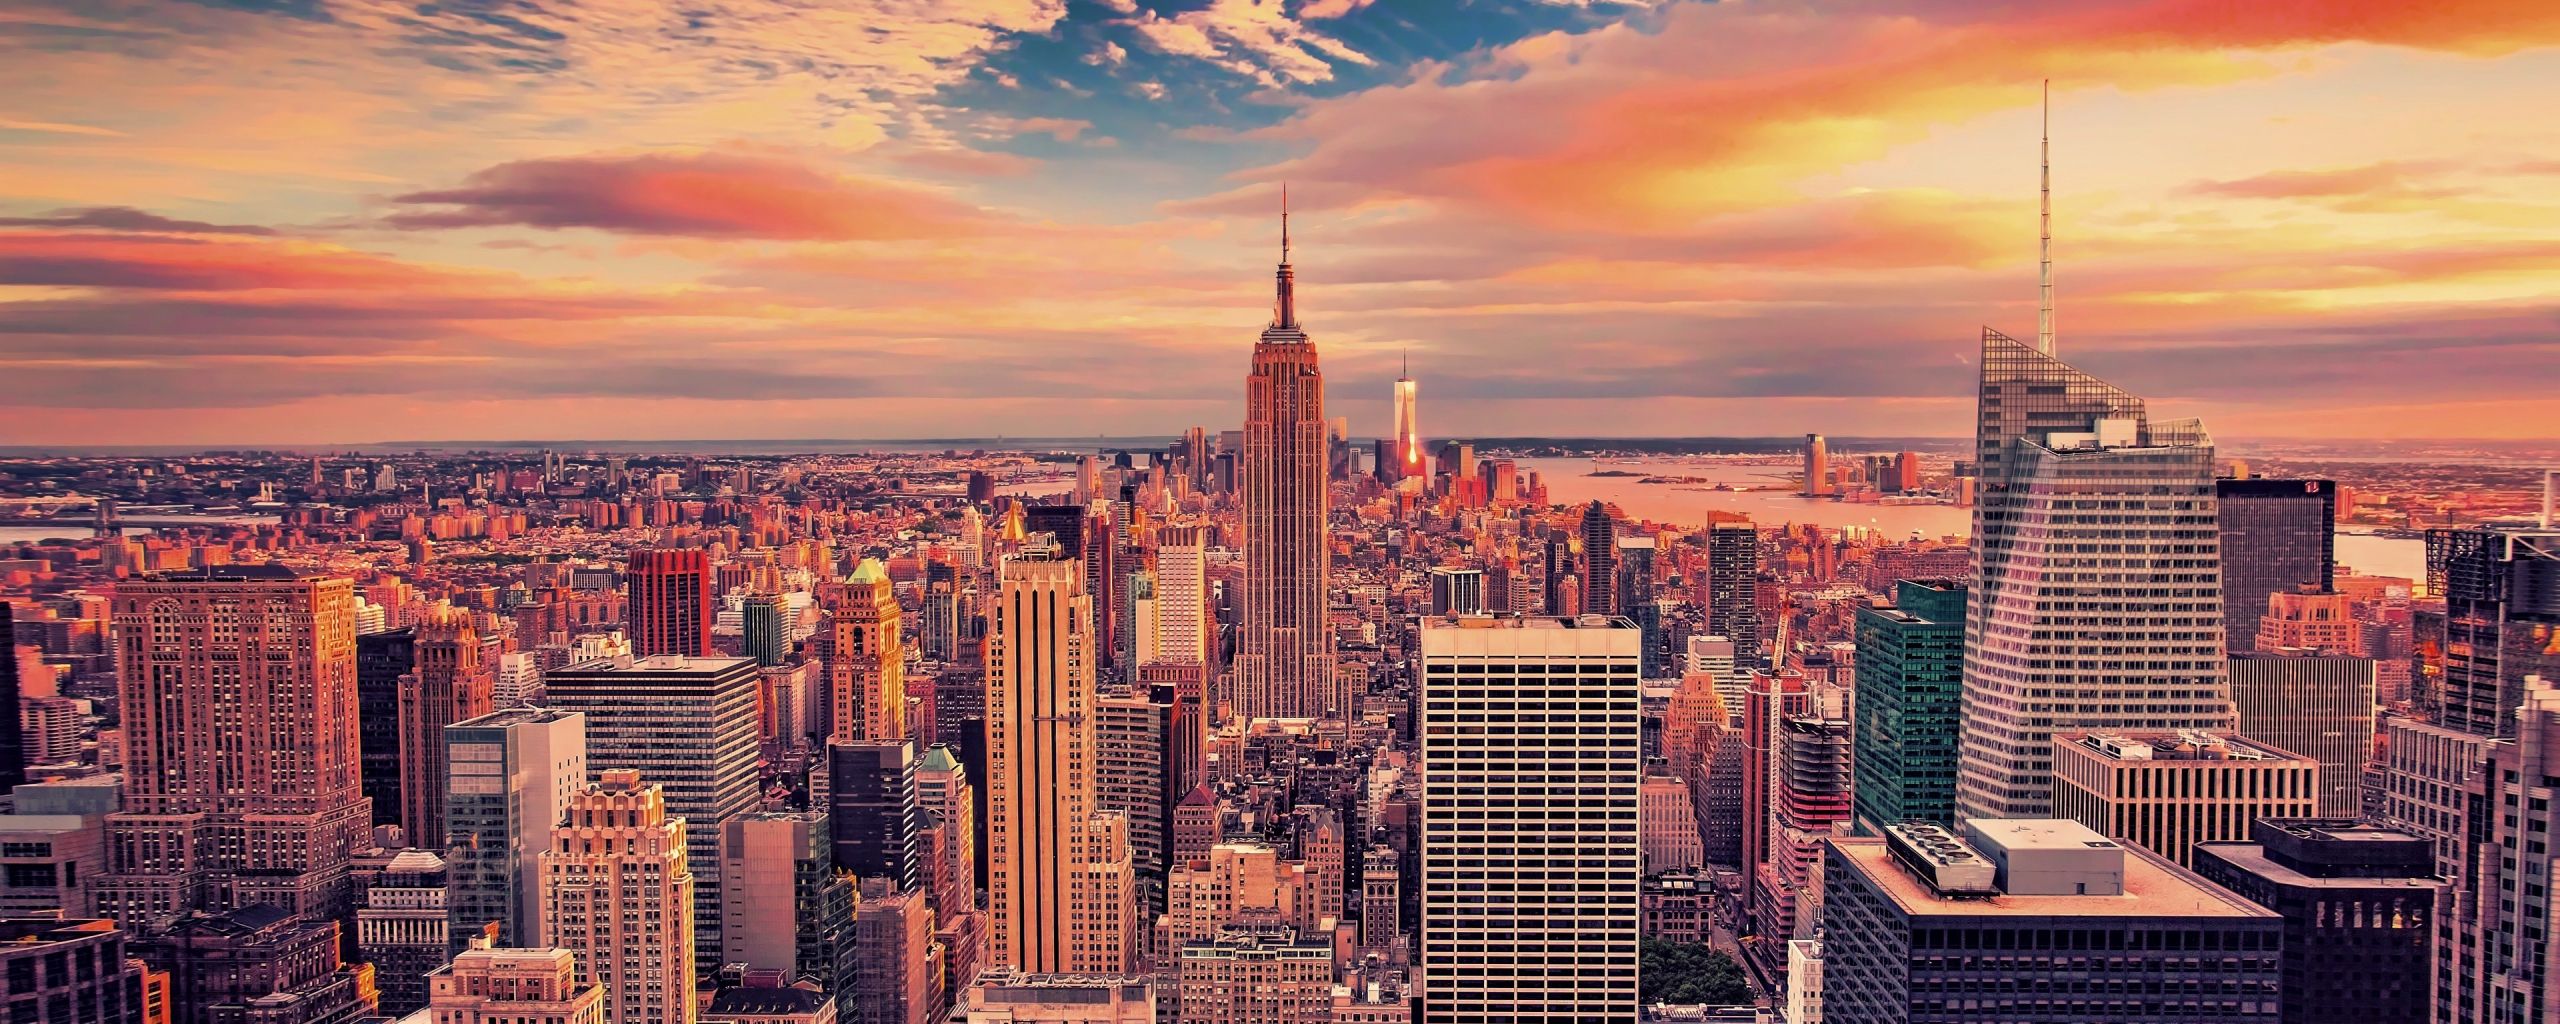 Desktop Wallpaper Empire State Building, Buildings, Skyscrapers, New York City, Sunset, 4k, HD Image, Picture, Background, B5fc0b